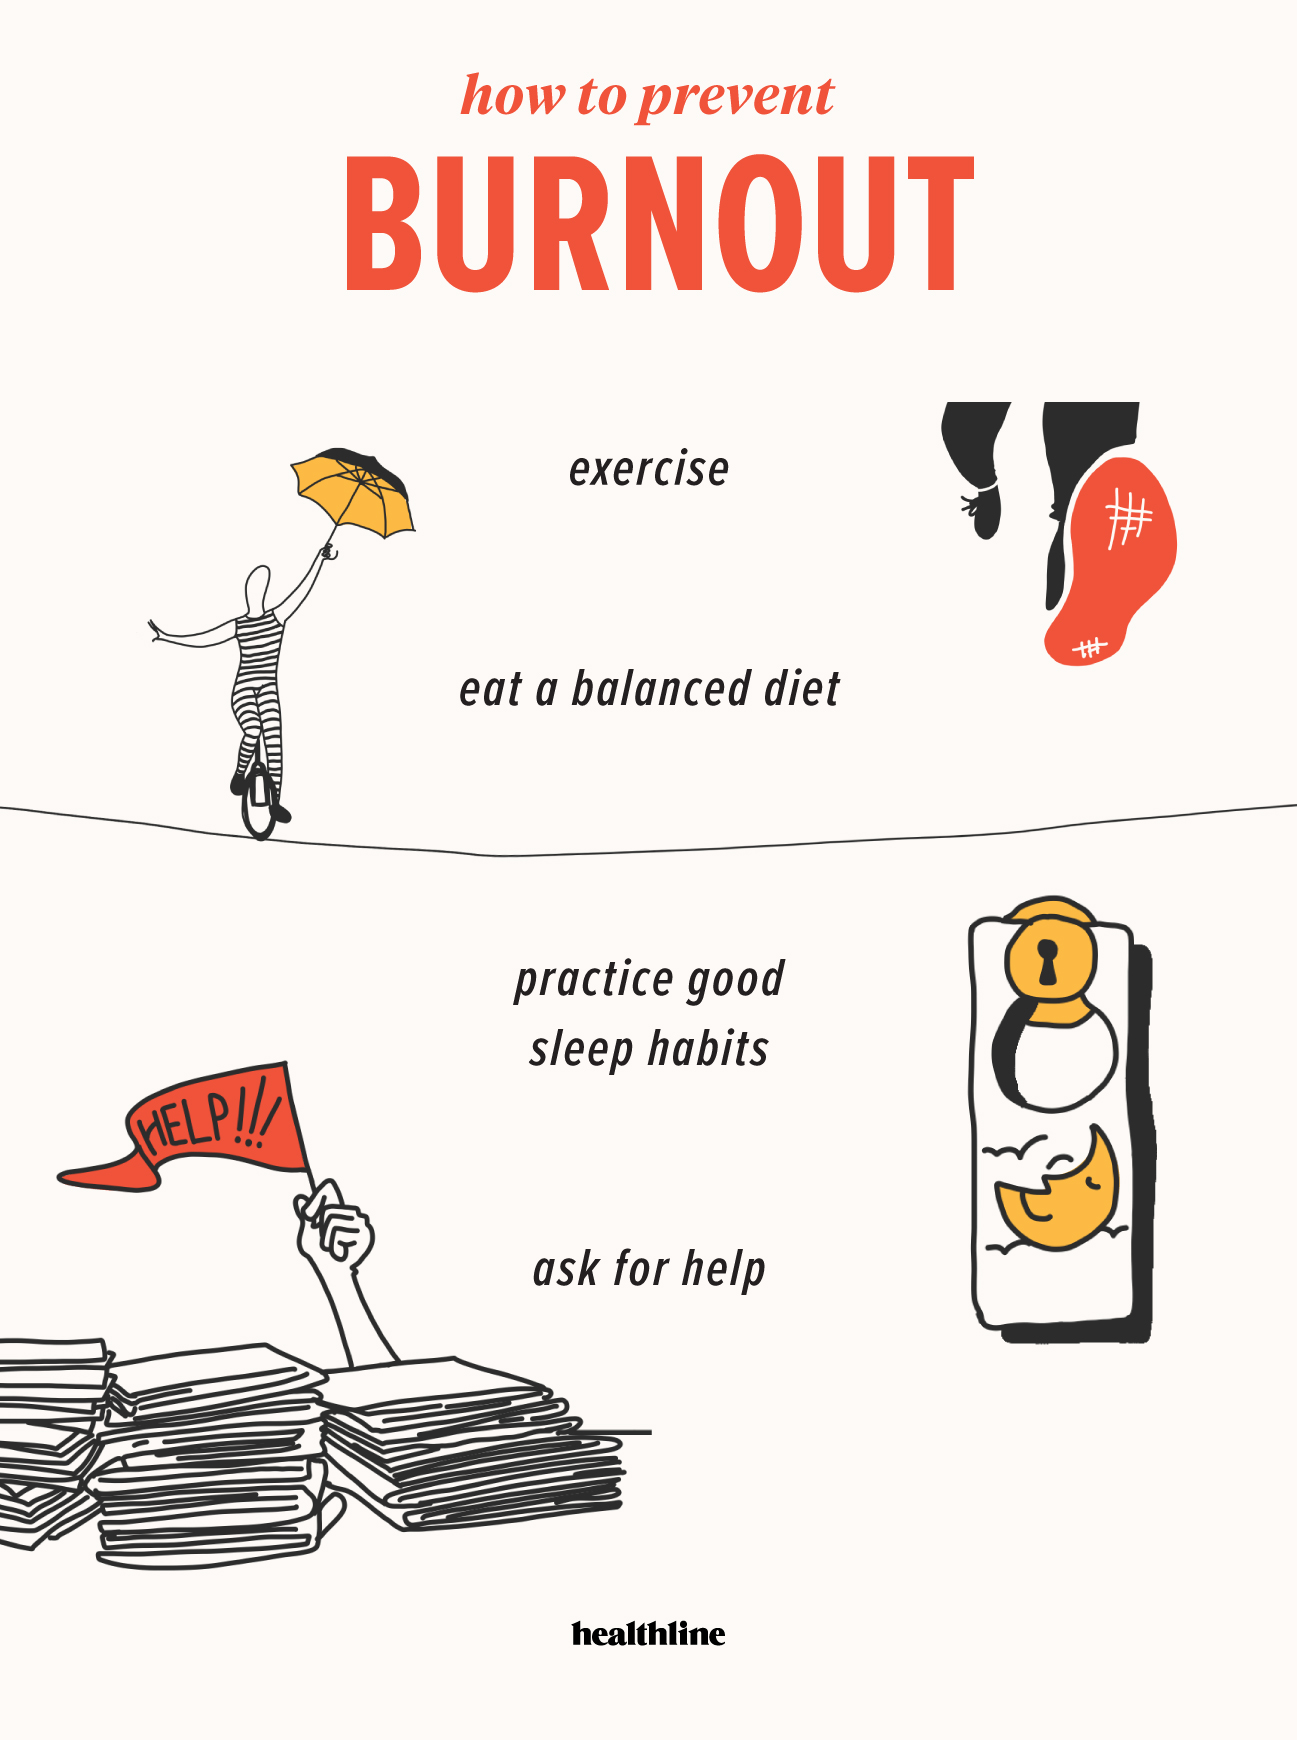 How to Identify and Prevent Burnout